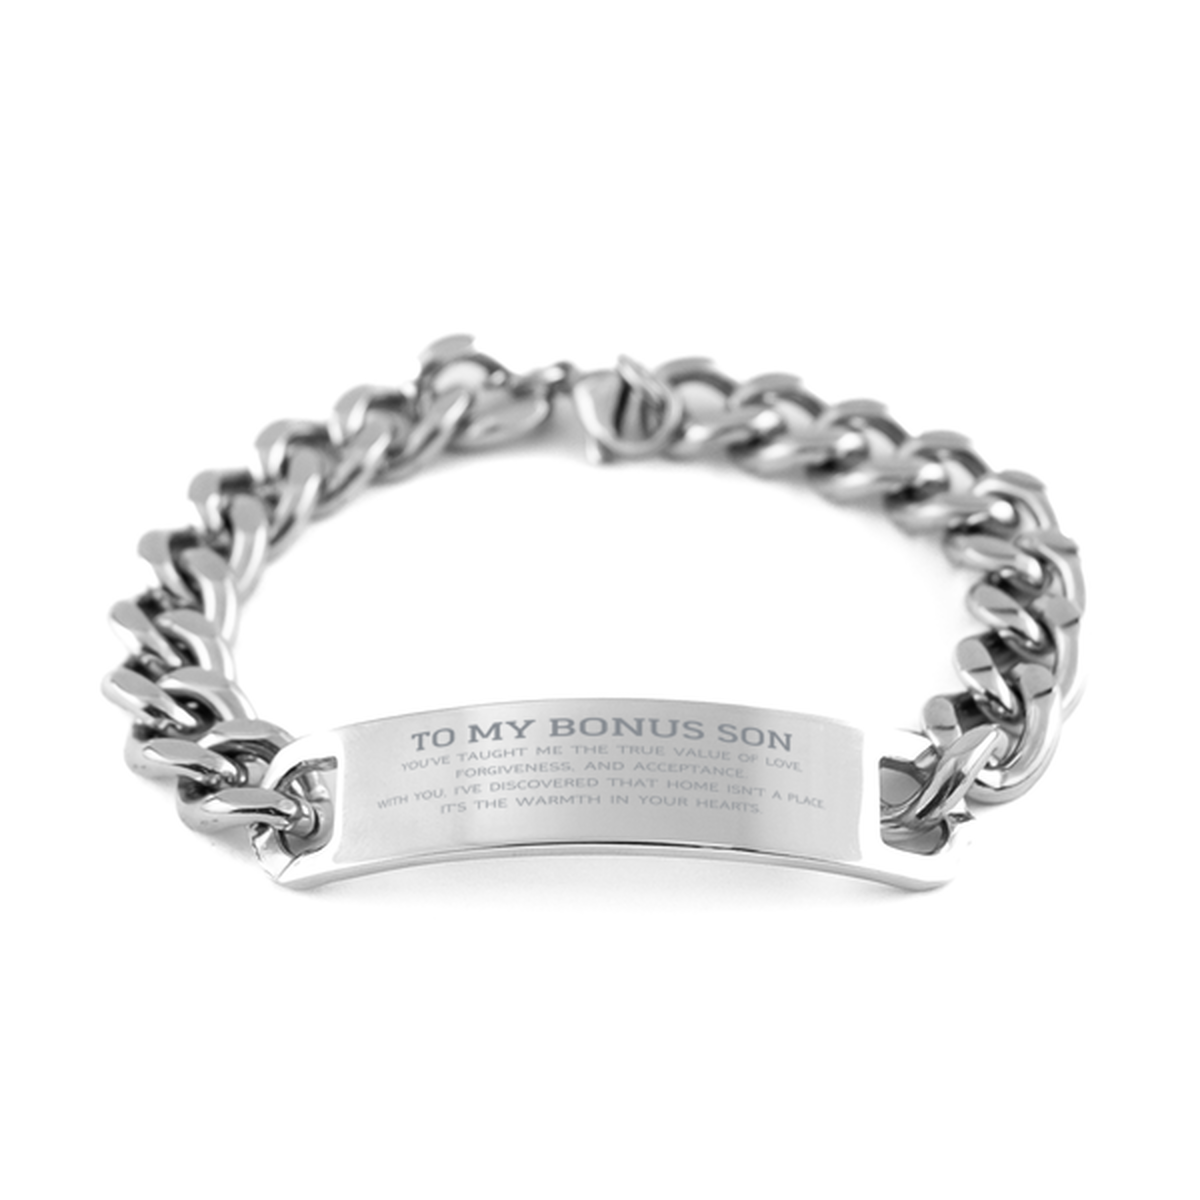 To My Bonus Son Gifts, You've taught me the true value of love, Thank You Gifts For Bonus Son, Birthday Cuban Chain Stainless Steel Bracelet For Bonus Son